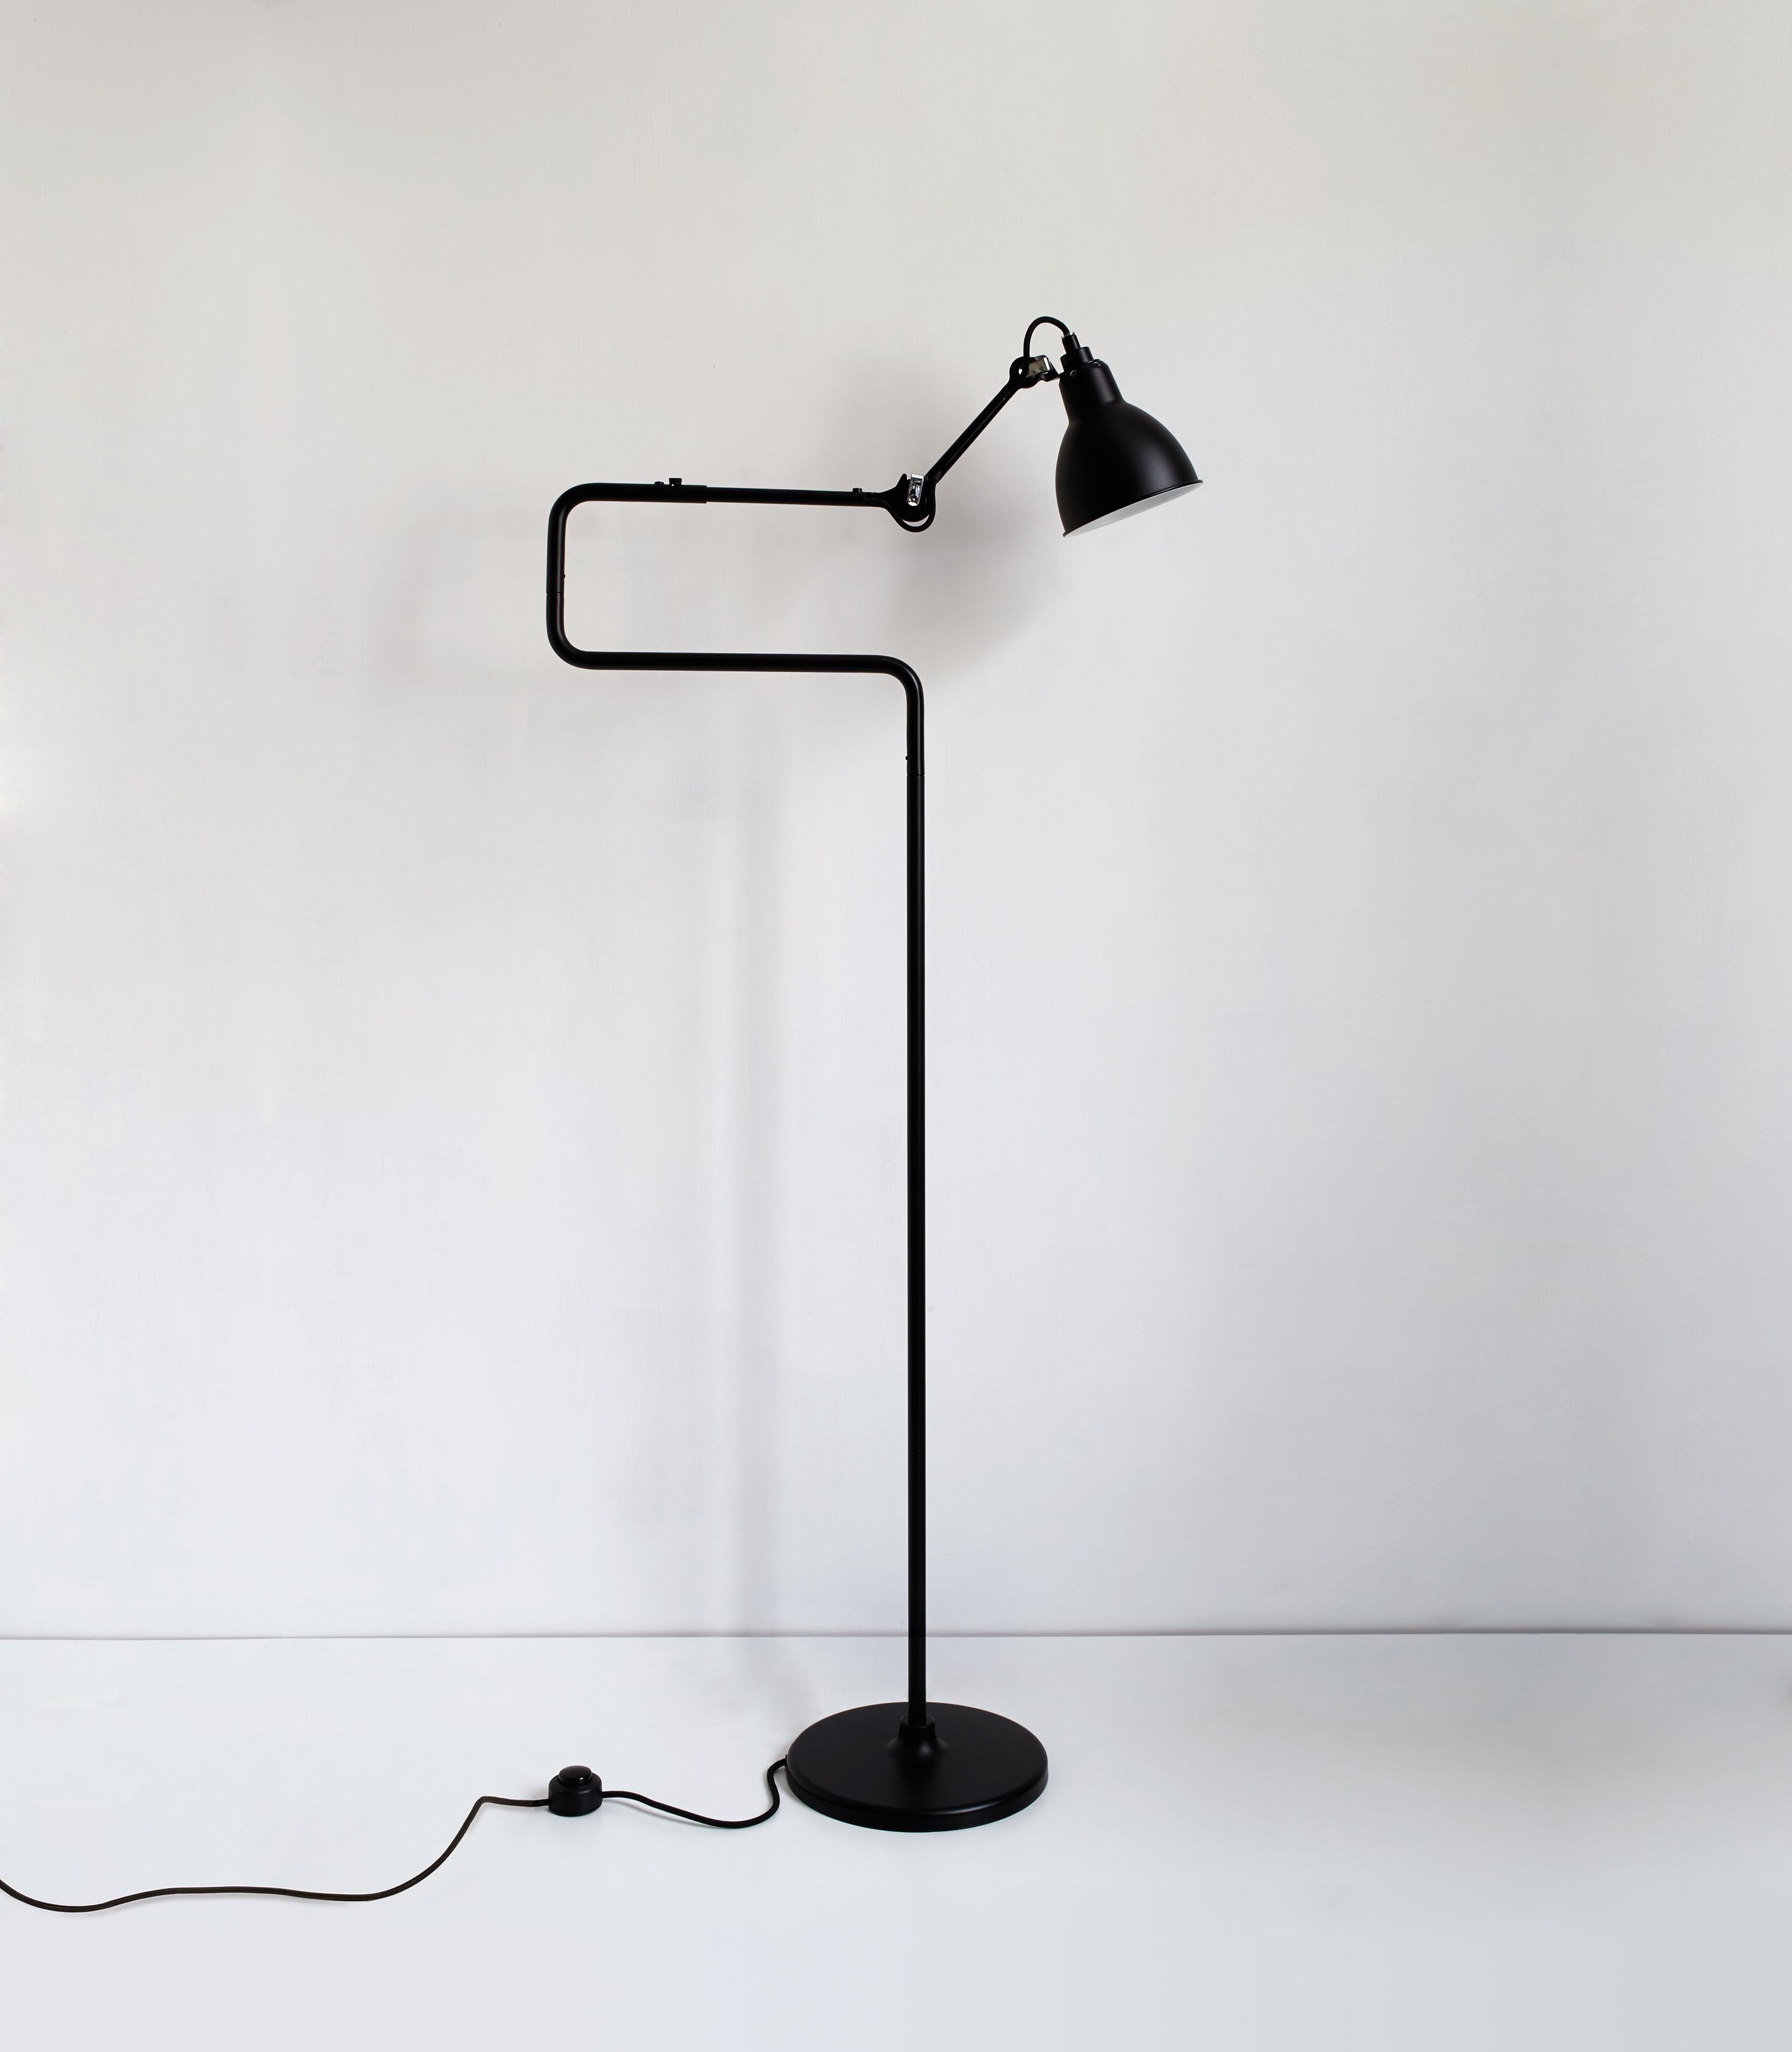 DCW Editions Lampe Gras N°411 Floor Lamp in Black Arm and Black Shade by Bernard-Albin Gras
 
 In 1921 Bernard-Albin GRAS designed a series of lamps for use in offices and in industrial environments. The GRAS lamp, as it was subsequently called, was